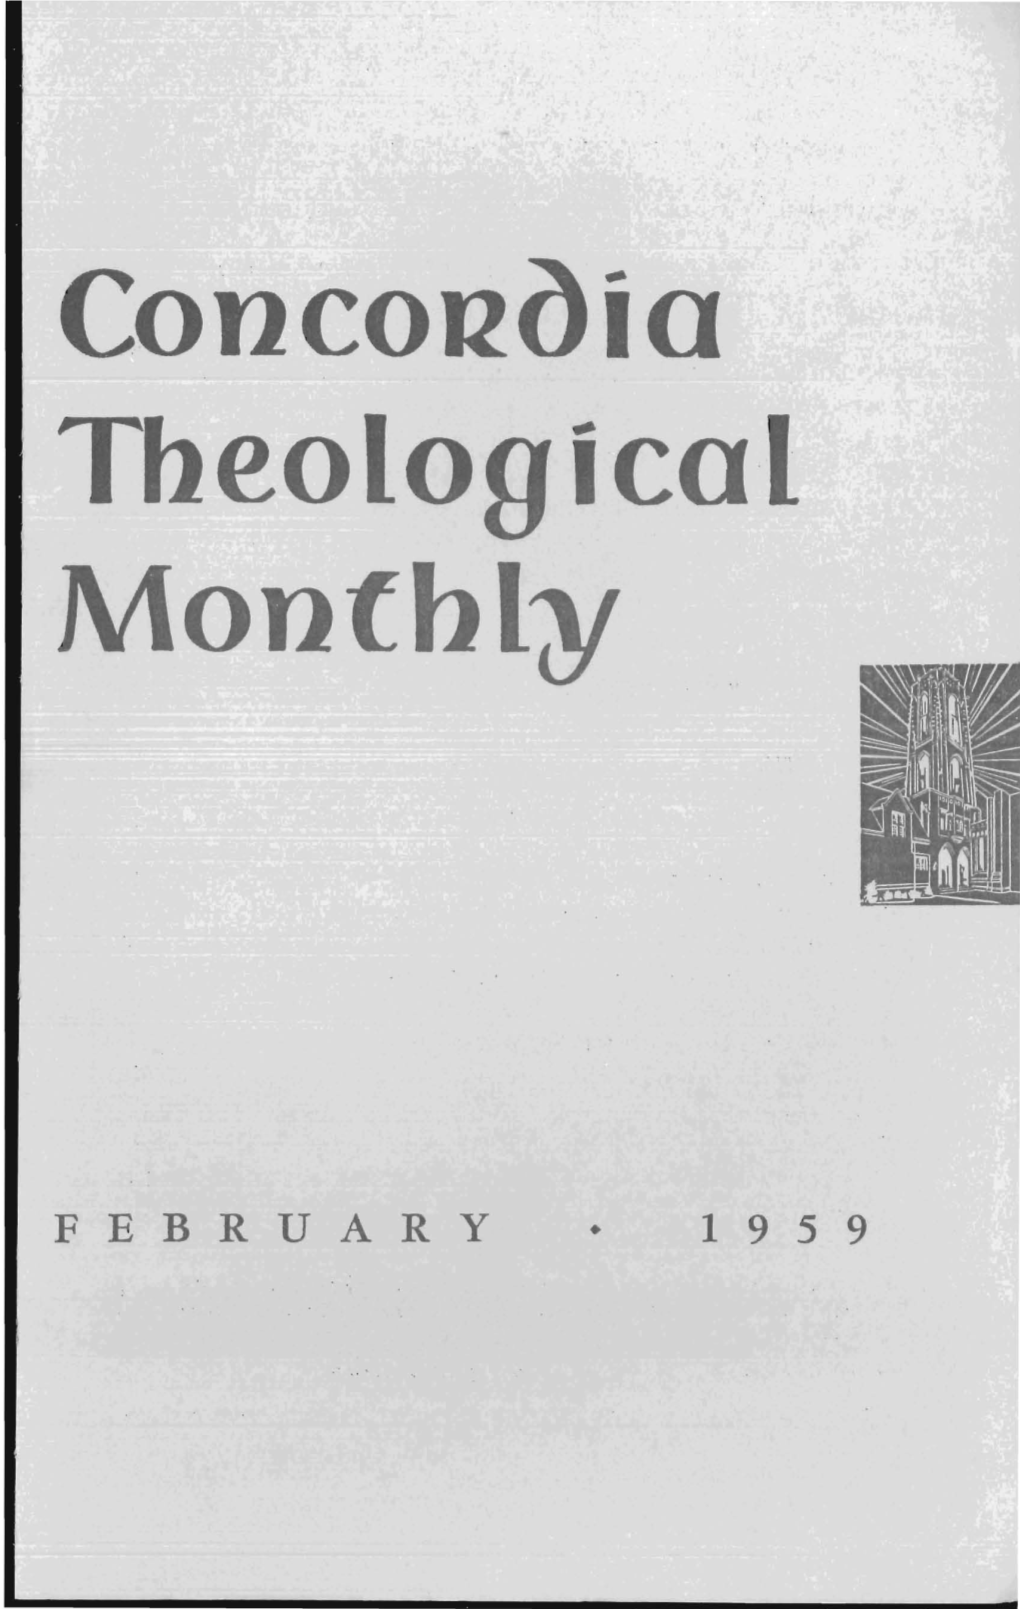 Theological Monthly